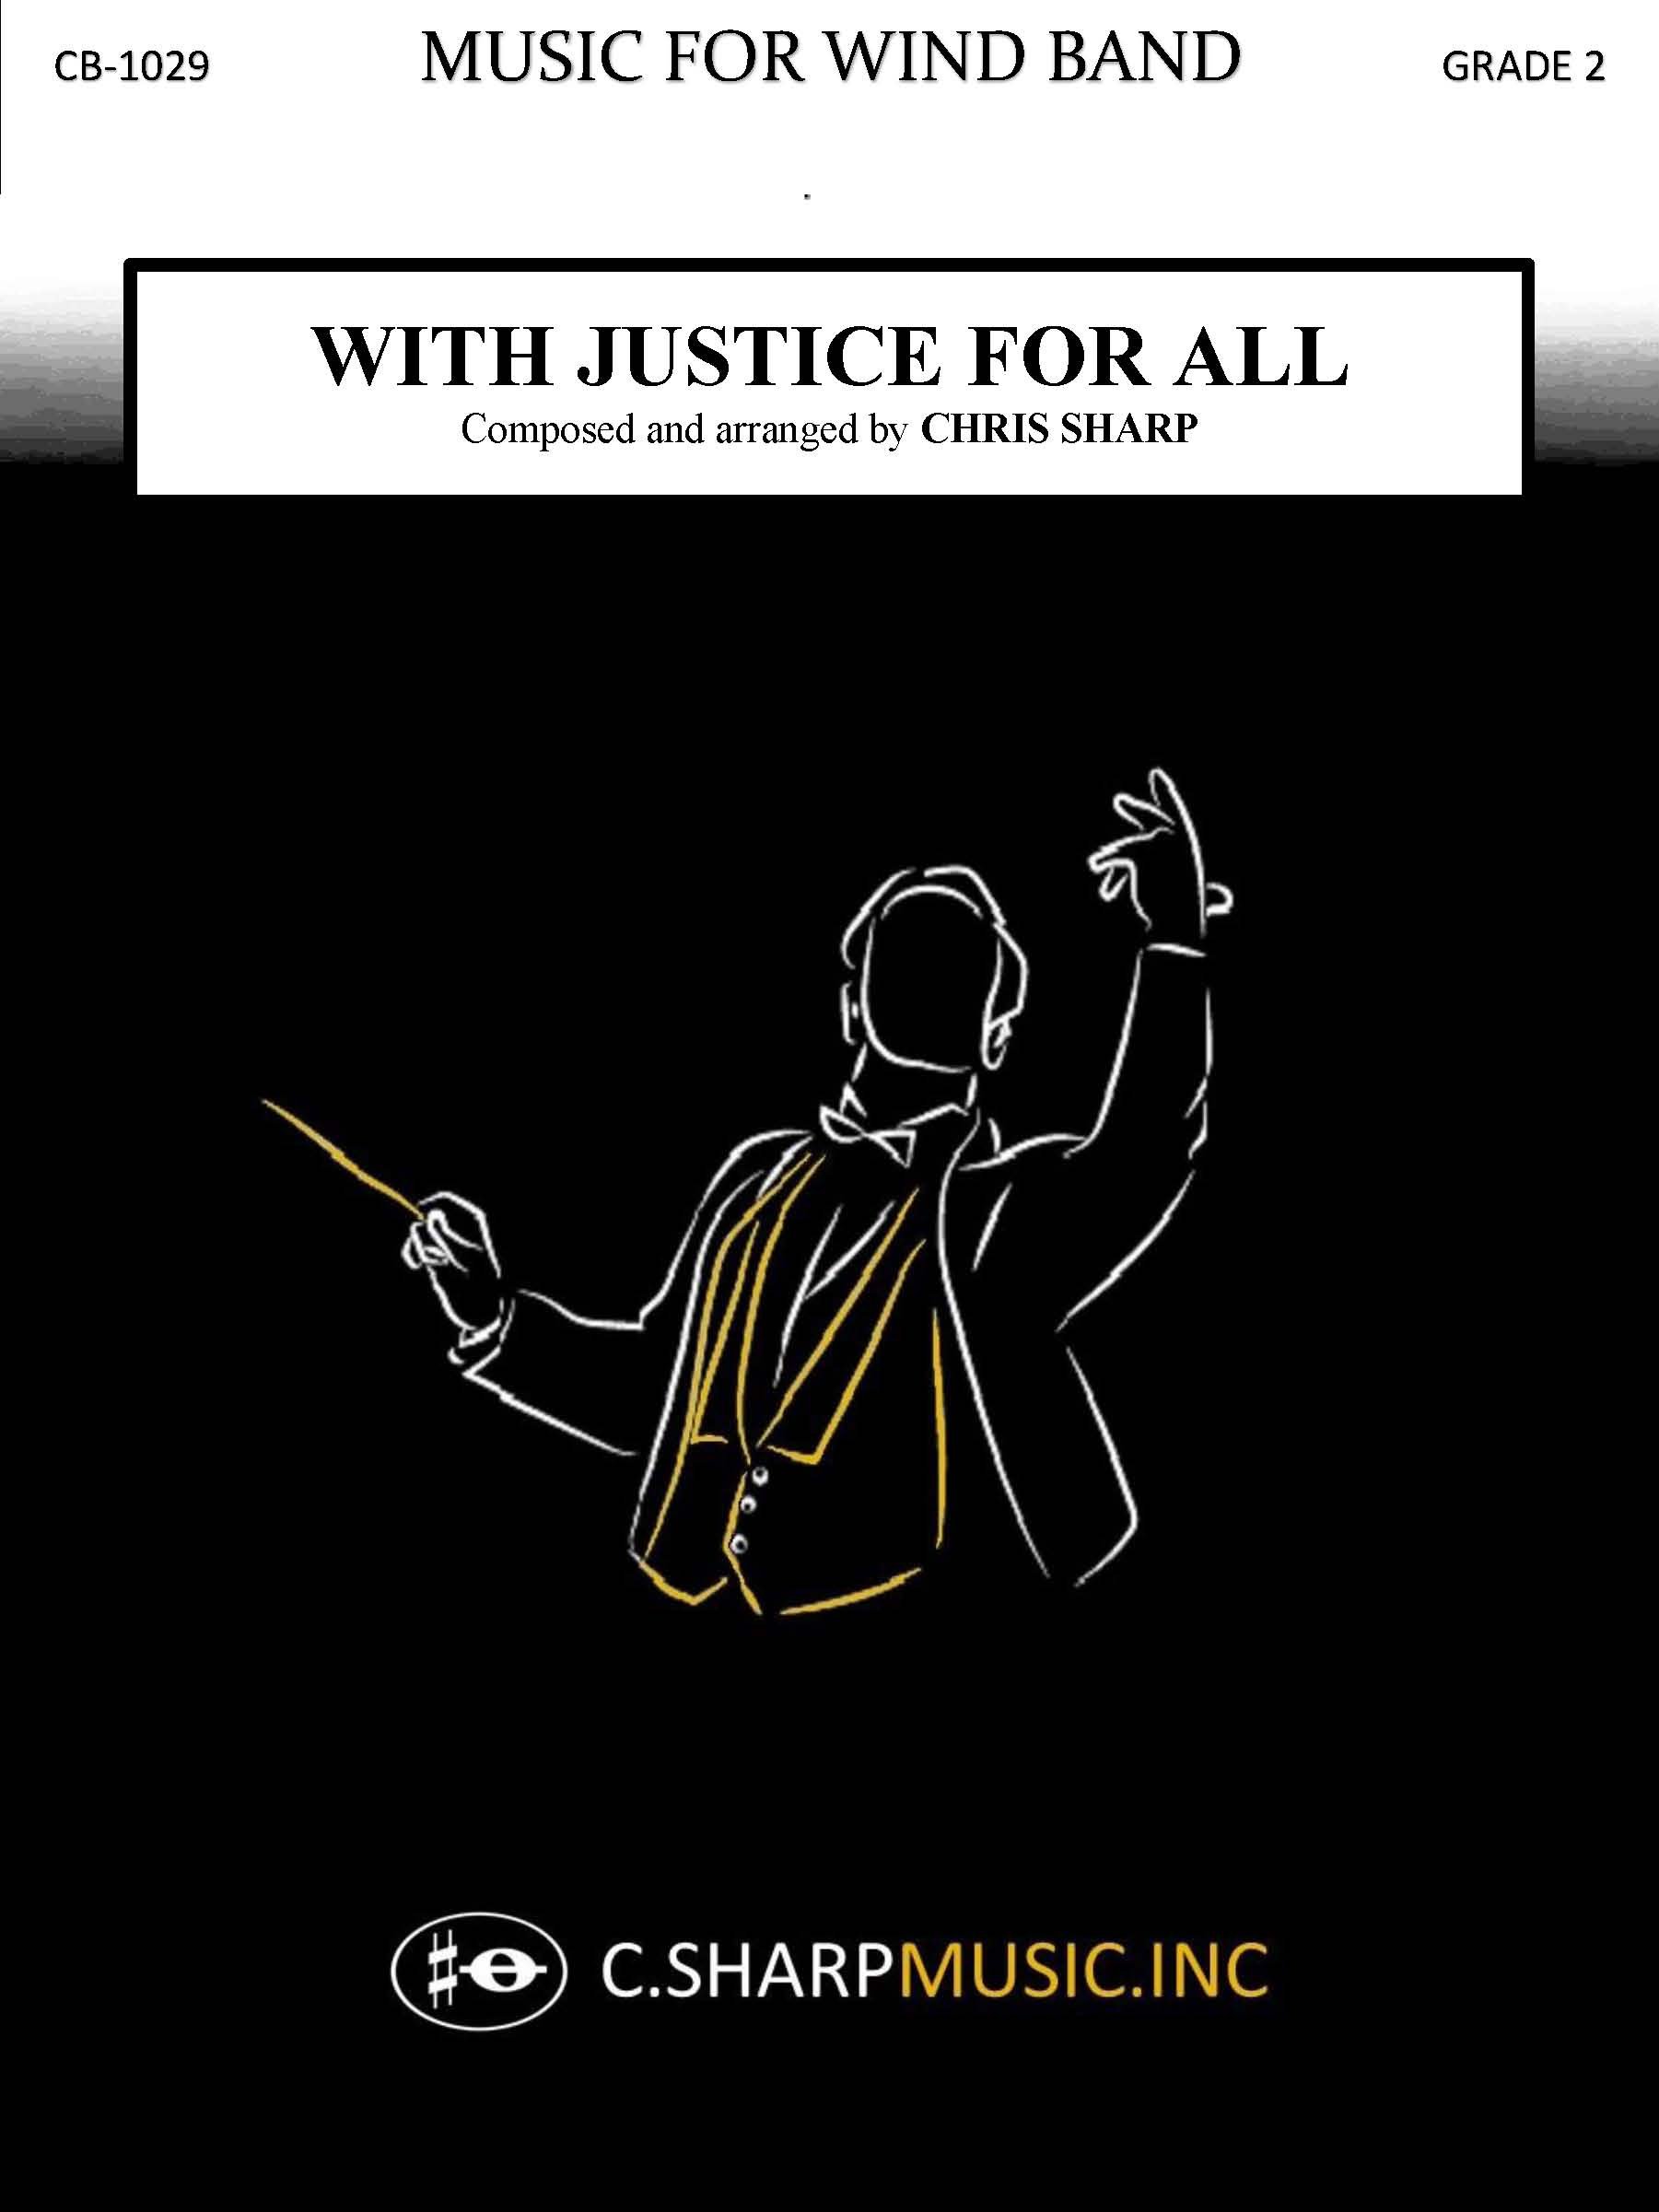 With Justice for All